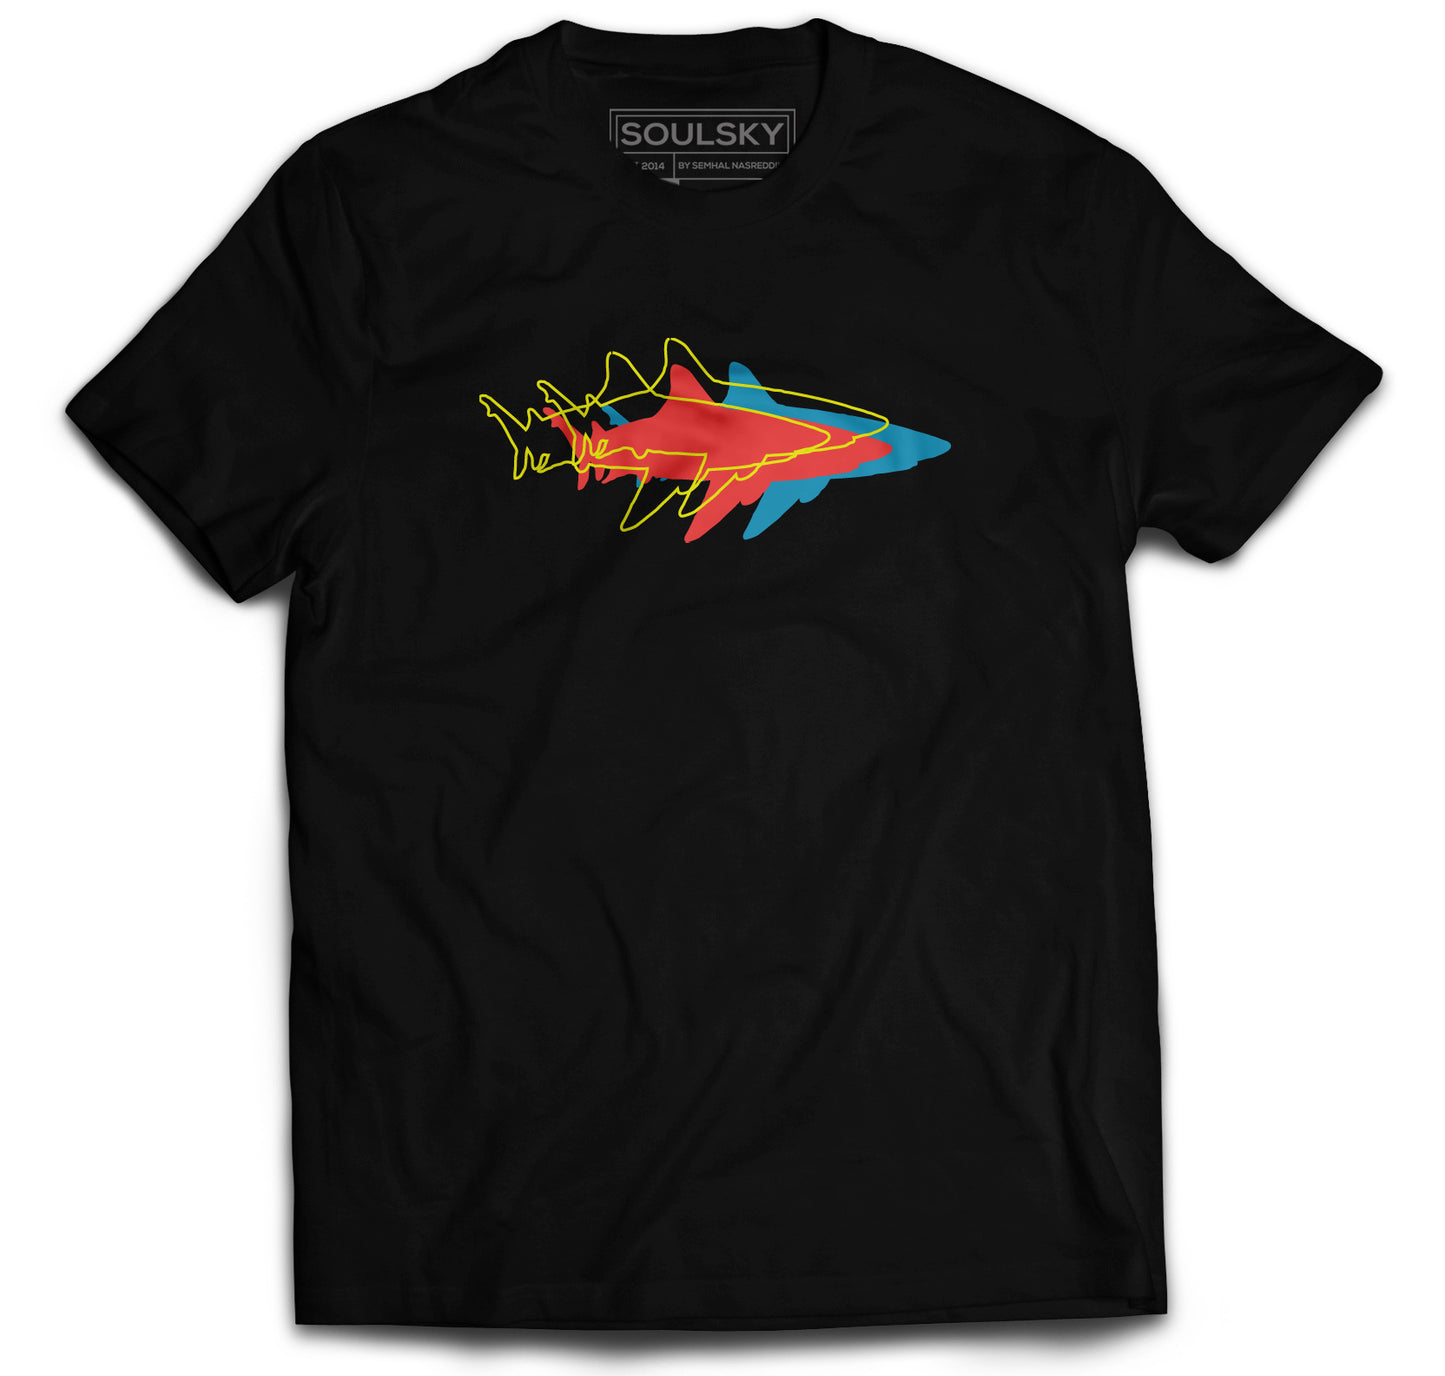 STAY THE COURSE Tee - SOULSKY